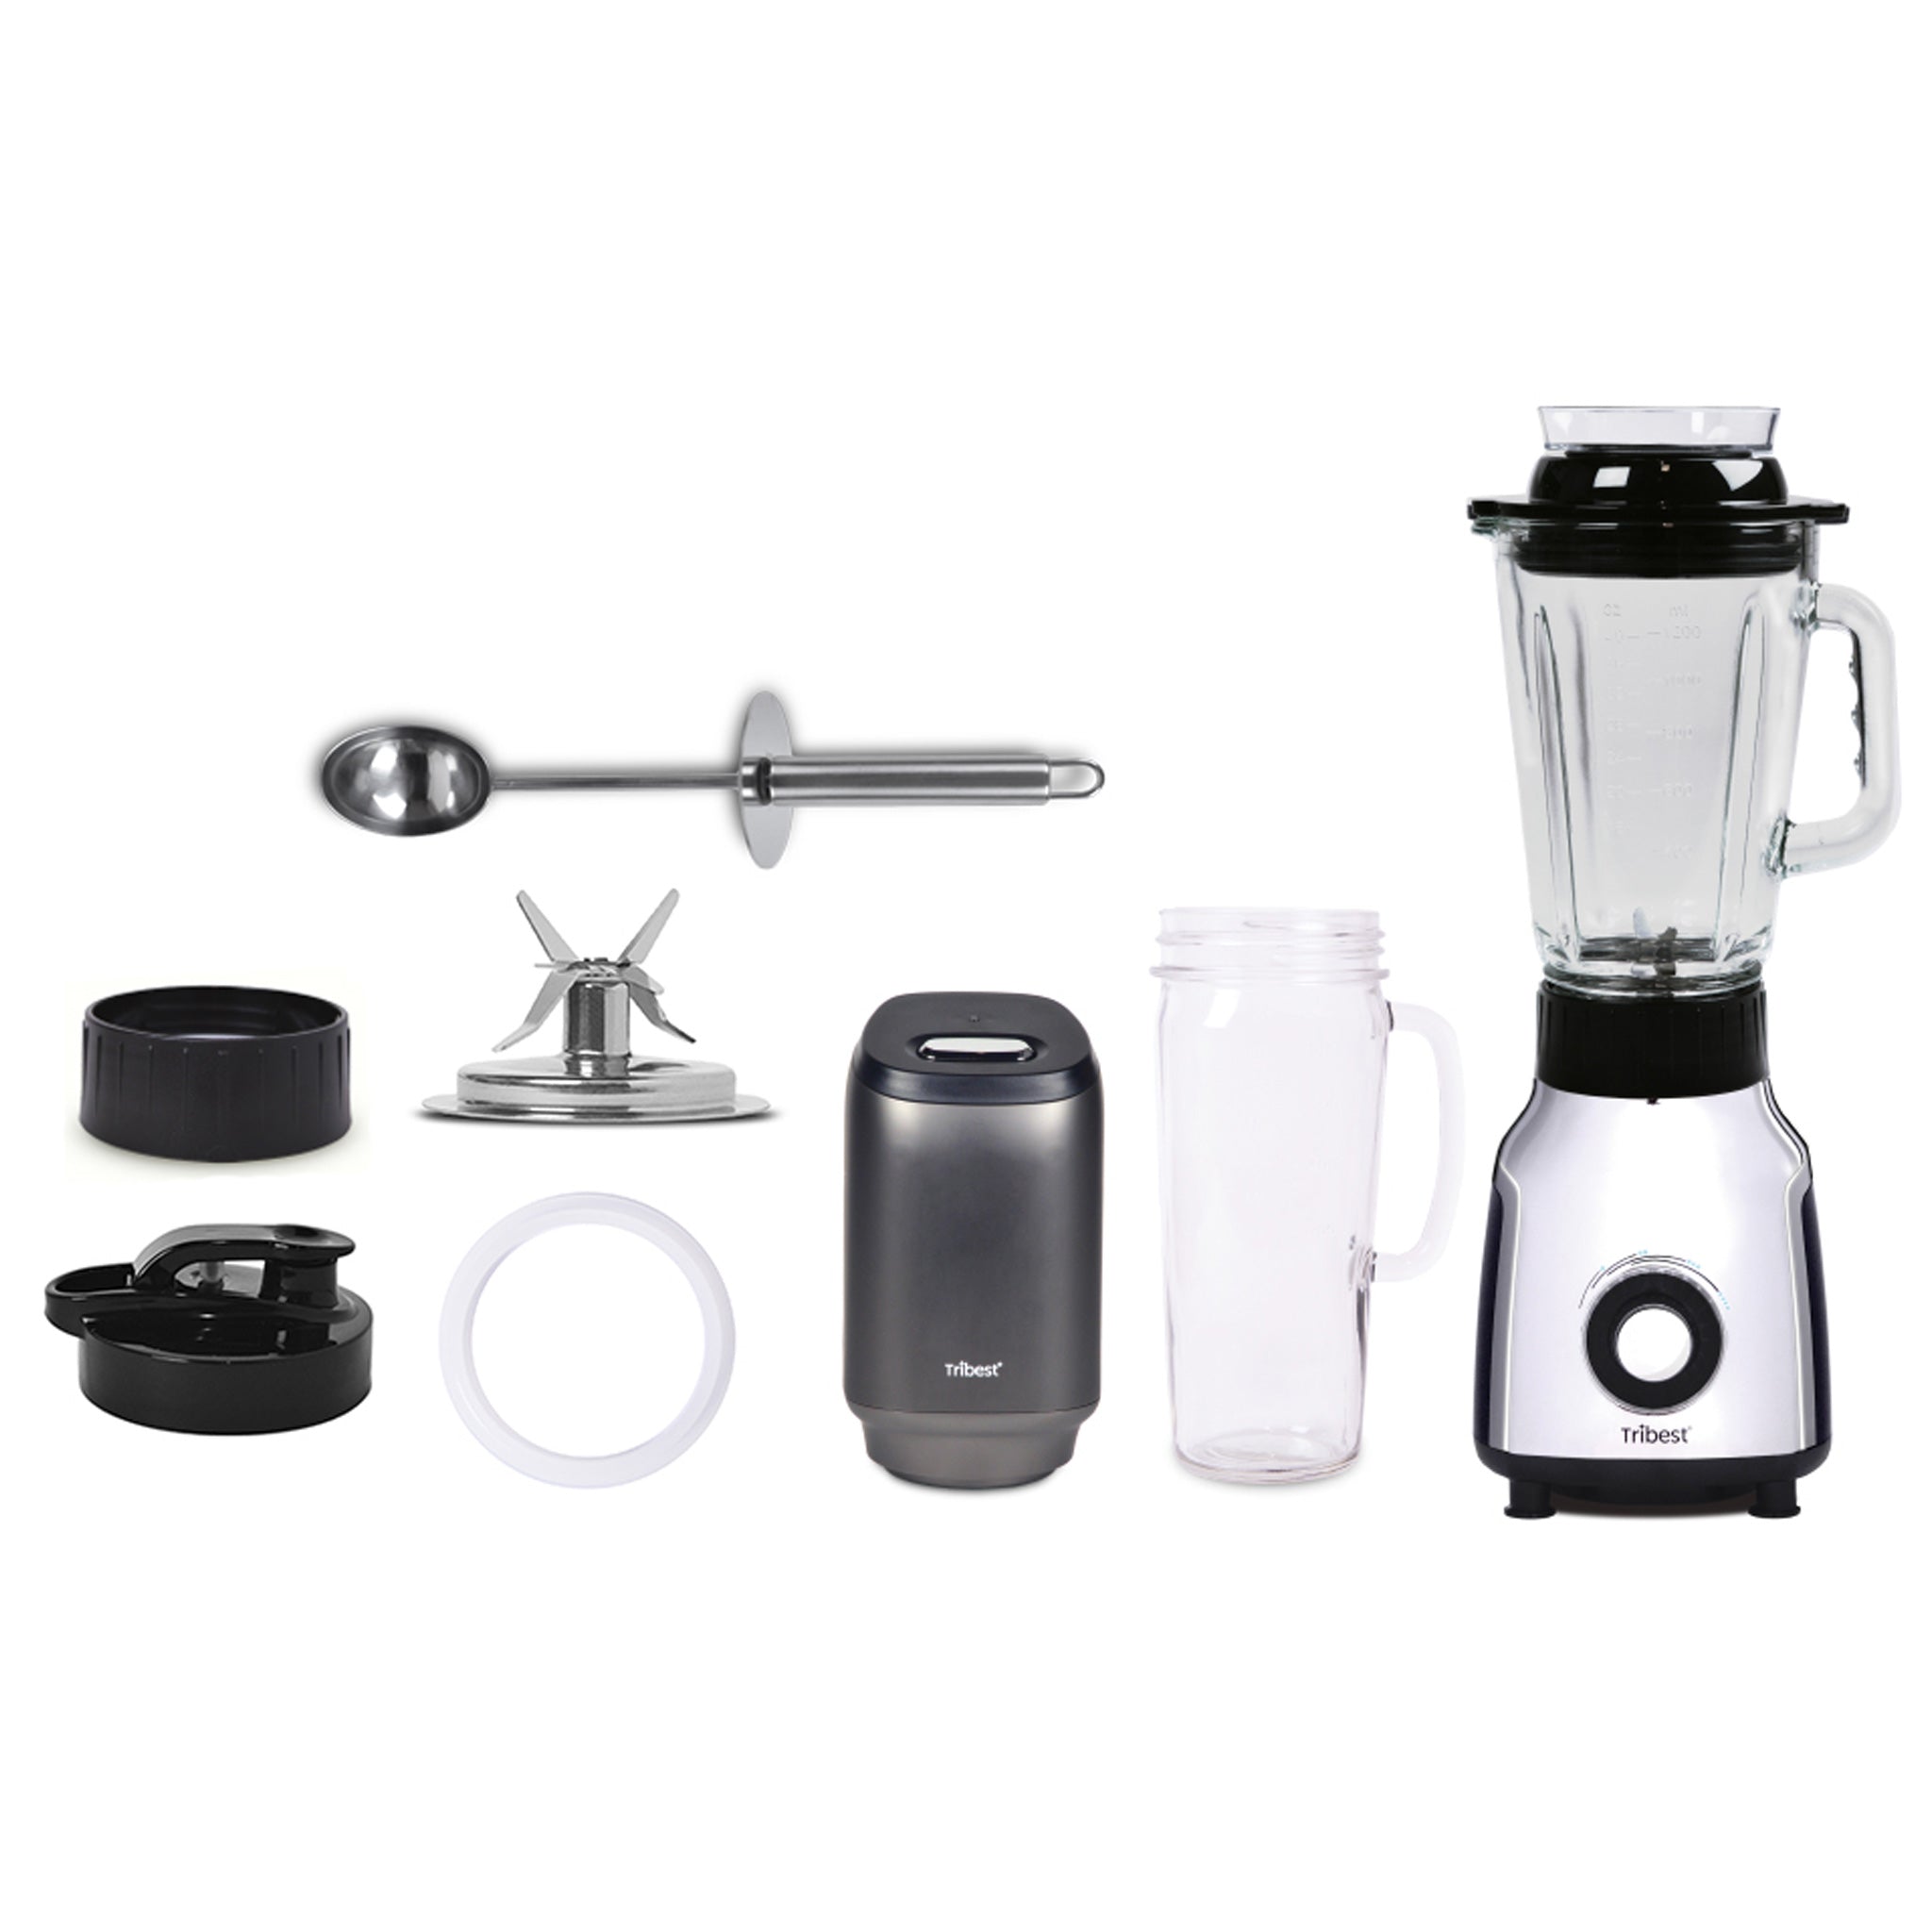  Tribest PBG-5050-A Portable Blender for Shakes and Smoothies  with Glass Blender Cups, Chrome: Home & Kitchen